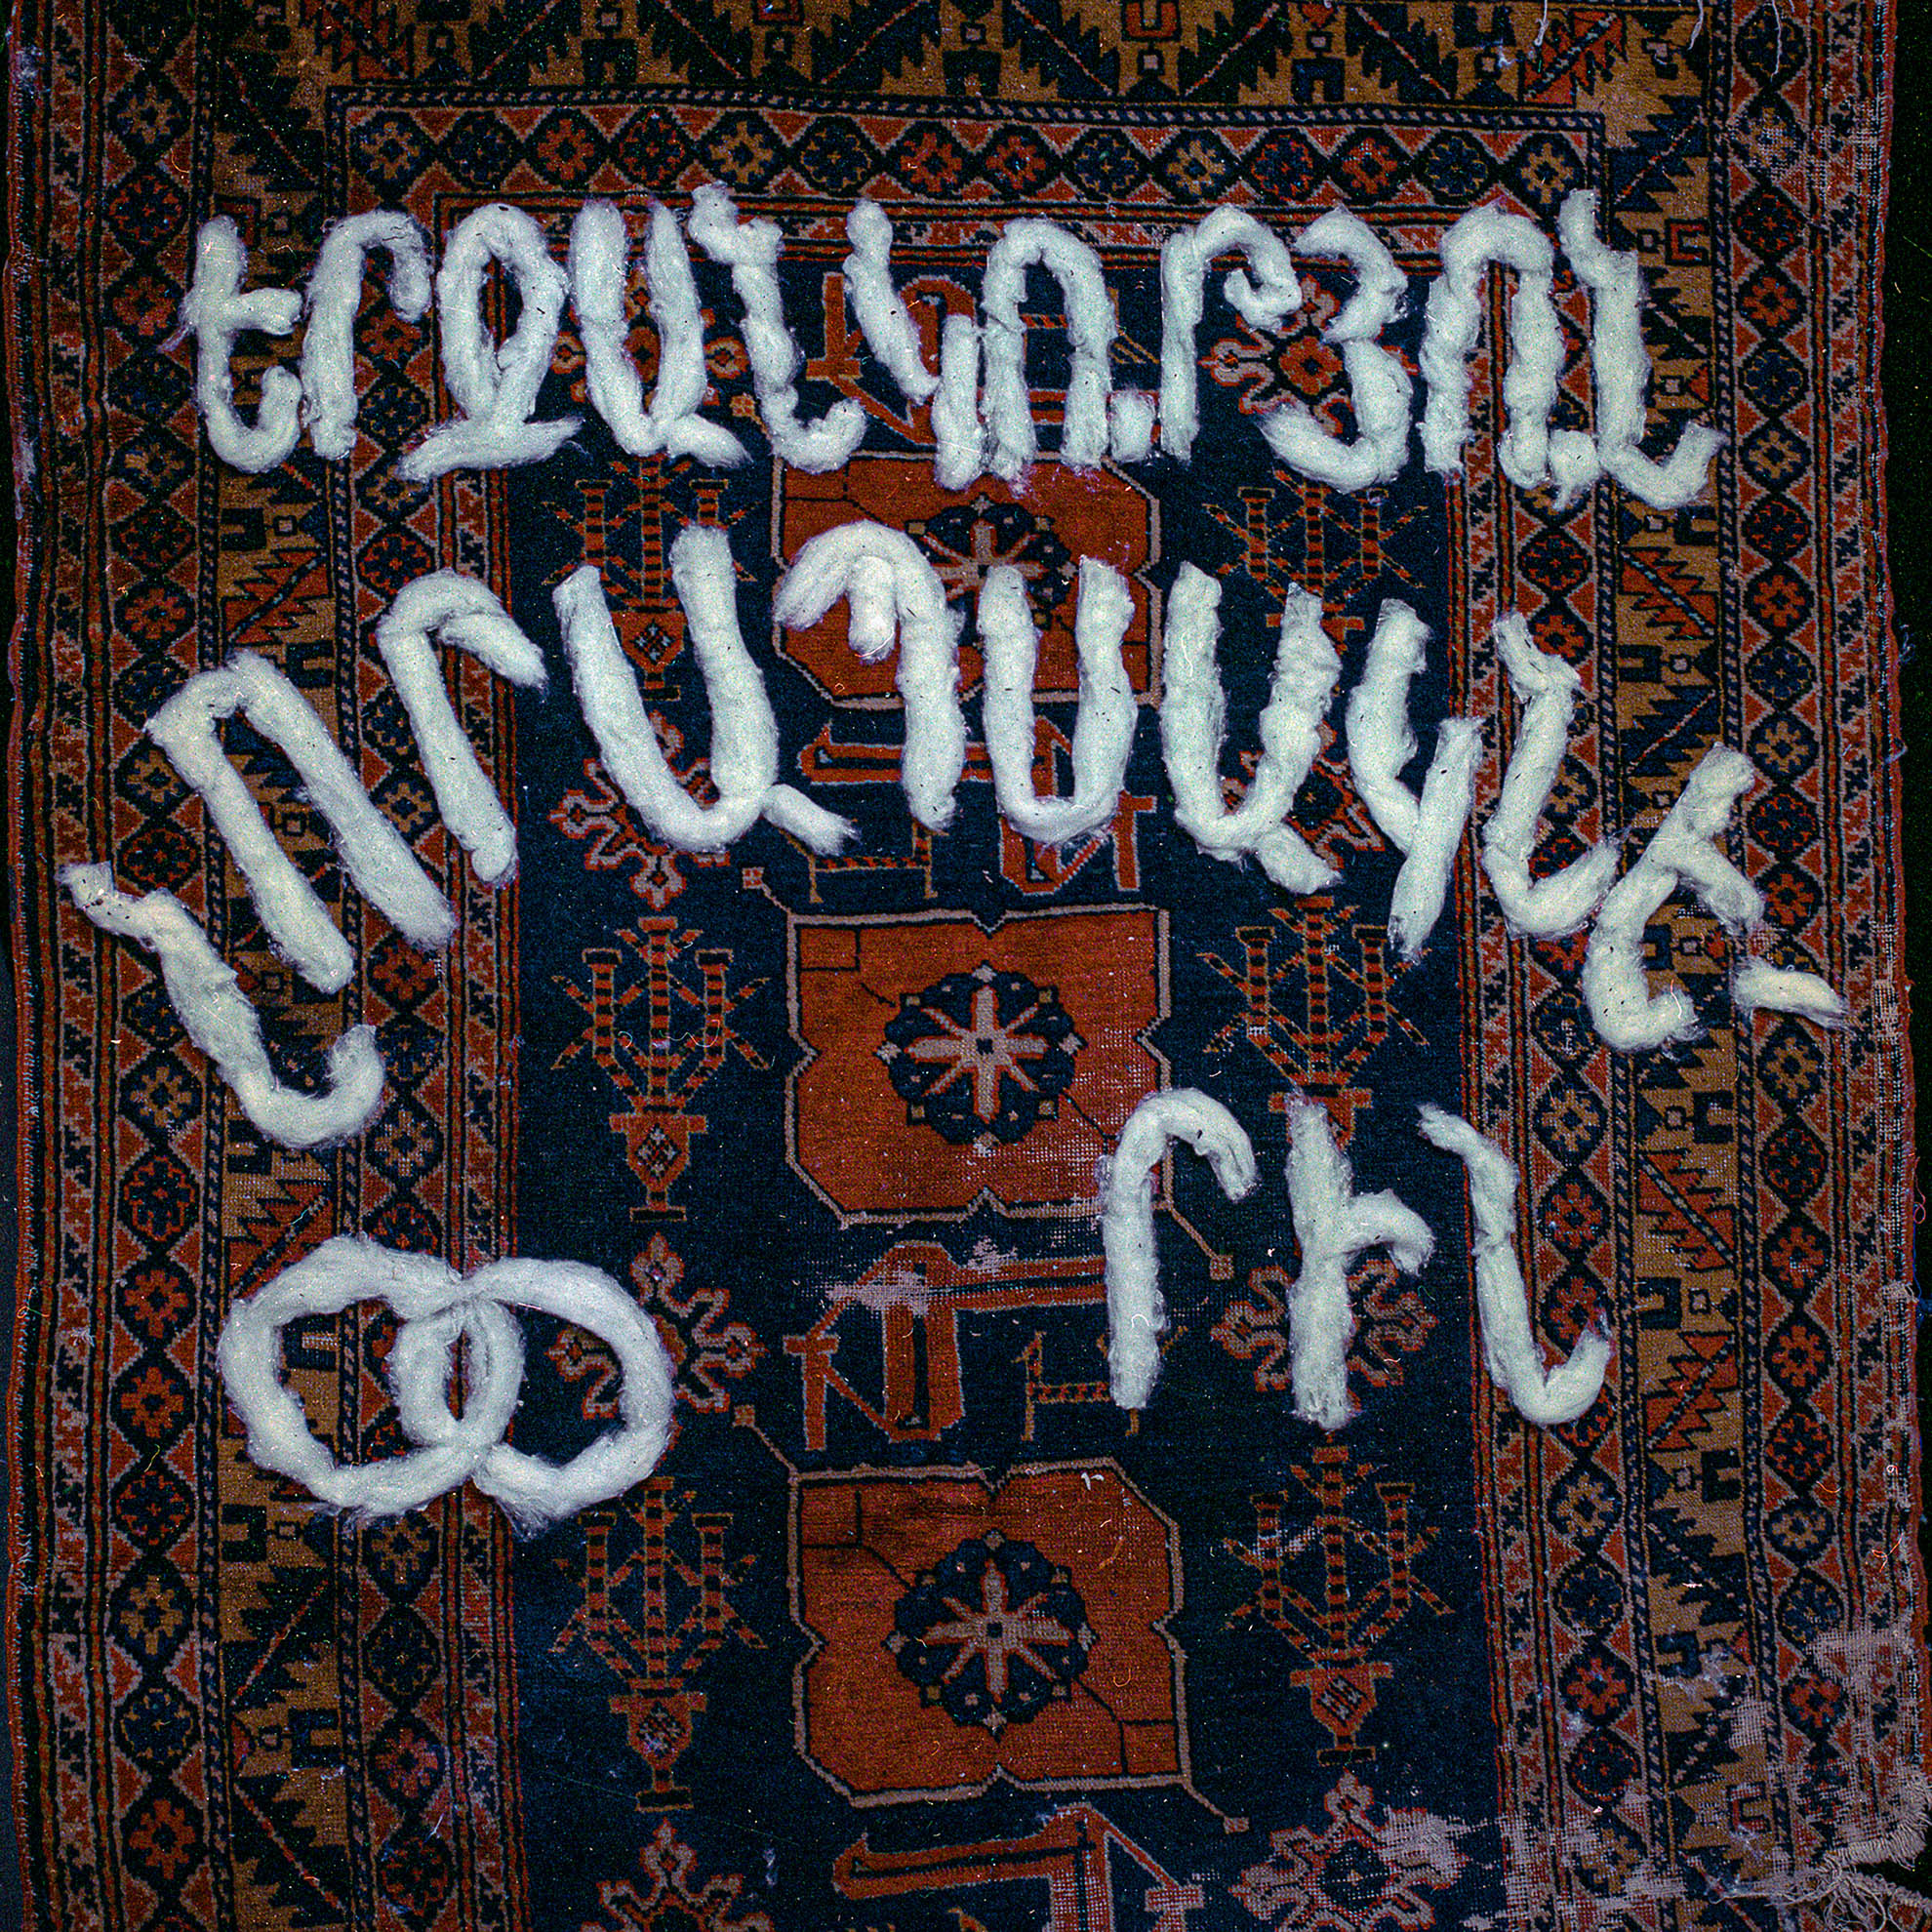 Carpet is one of the symbolic elements of the wedding ceremony, especially in the Soviet era. "Happiness to the newlyweds" or a similar phrase was stuck on the carpet with cotton, which was hung on the wall behind the newlyweds.